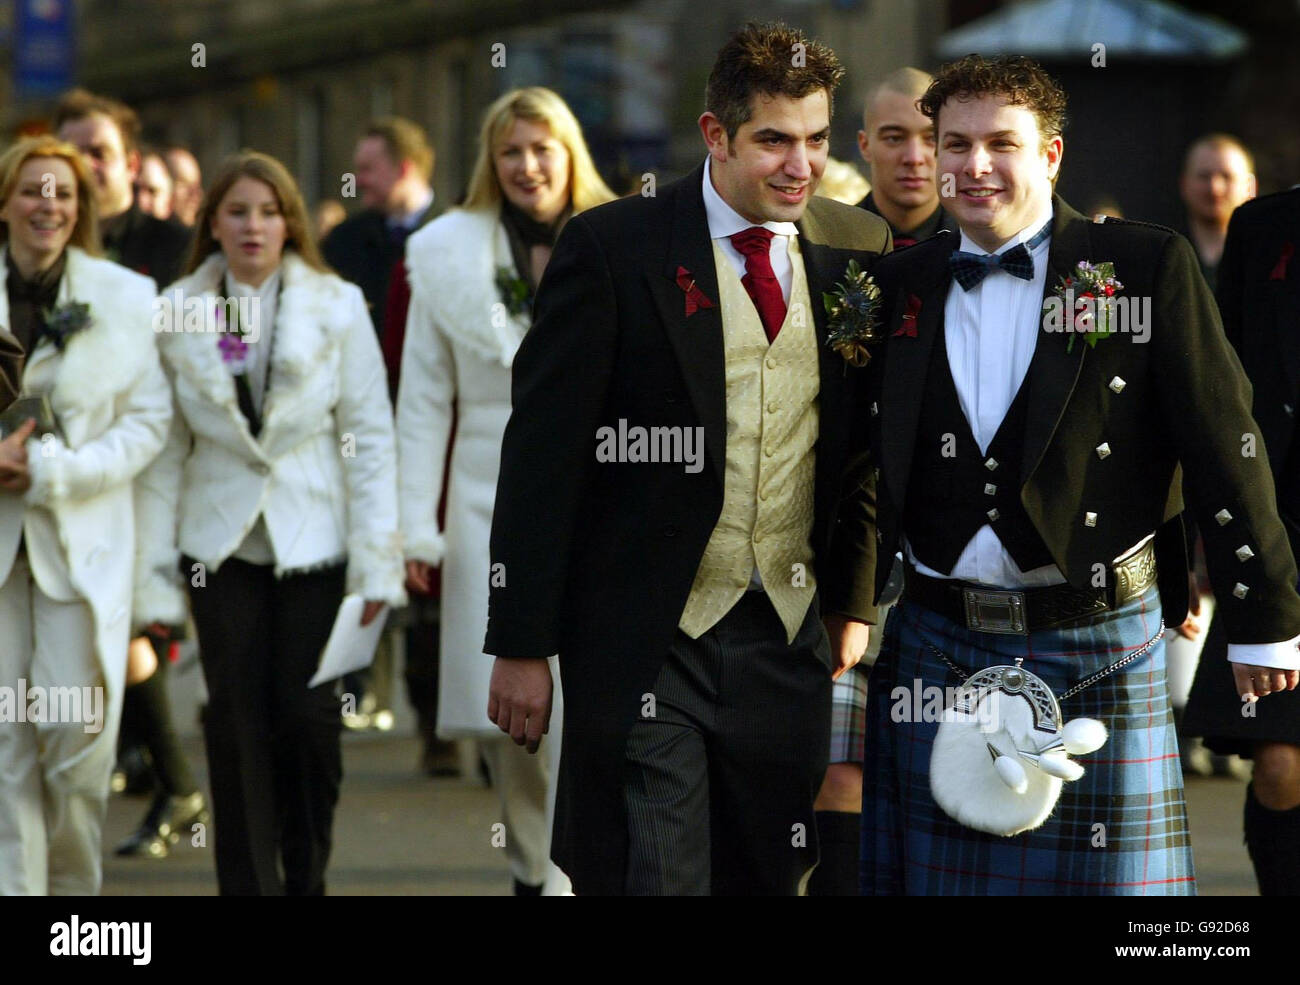 John Maguire (L) and Laurence Scott-Mackay pose for pictures after their civil ceremony in Edinburgh, Scotland, Tuesday December 20, 2005. The two men made history today when they became the first couple to exchange vows in a civil partnership ceremony in mainland Britain. Maguire and Scott-Mackay 'tied the knot' in a service held at the register office at the India Buildings in Edinburgh's Victoria Street. See PA Story SOCIAL Partnerships. PRESS ASSOCIATION Photo. Photo credit should read: David Cheskin/PA. Stock Photo